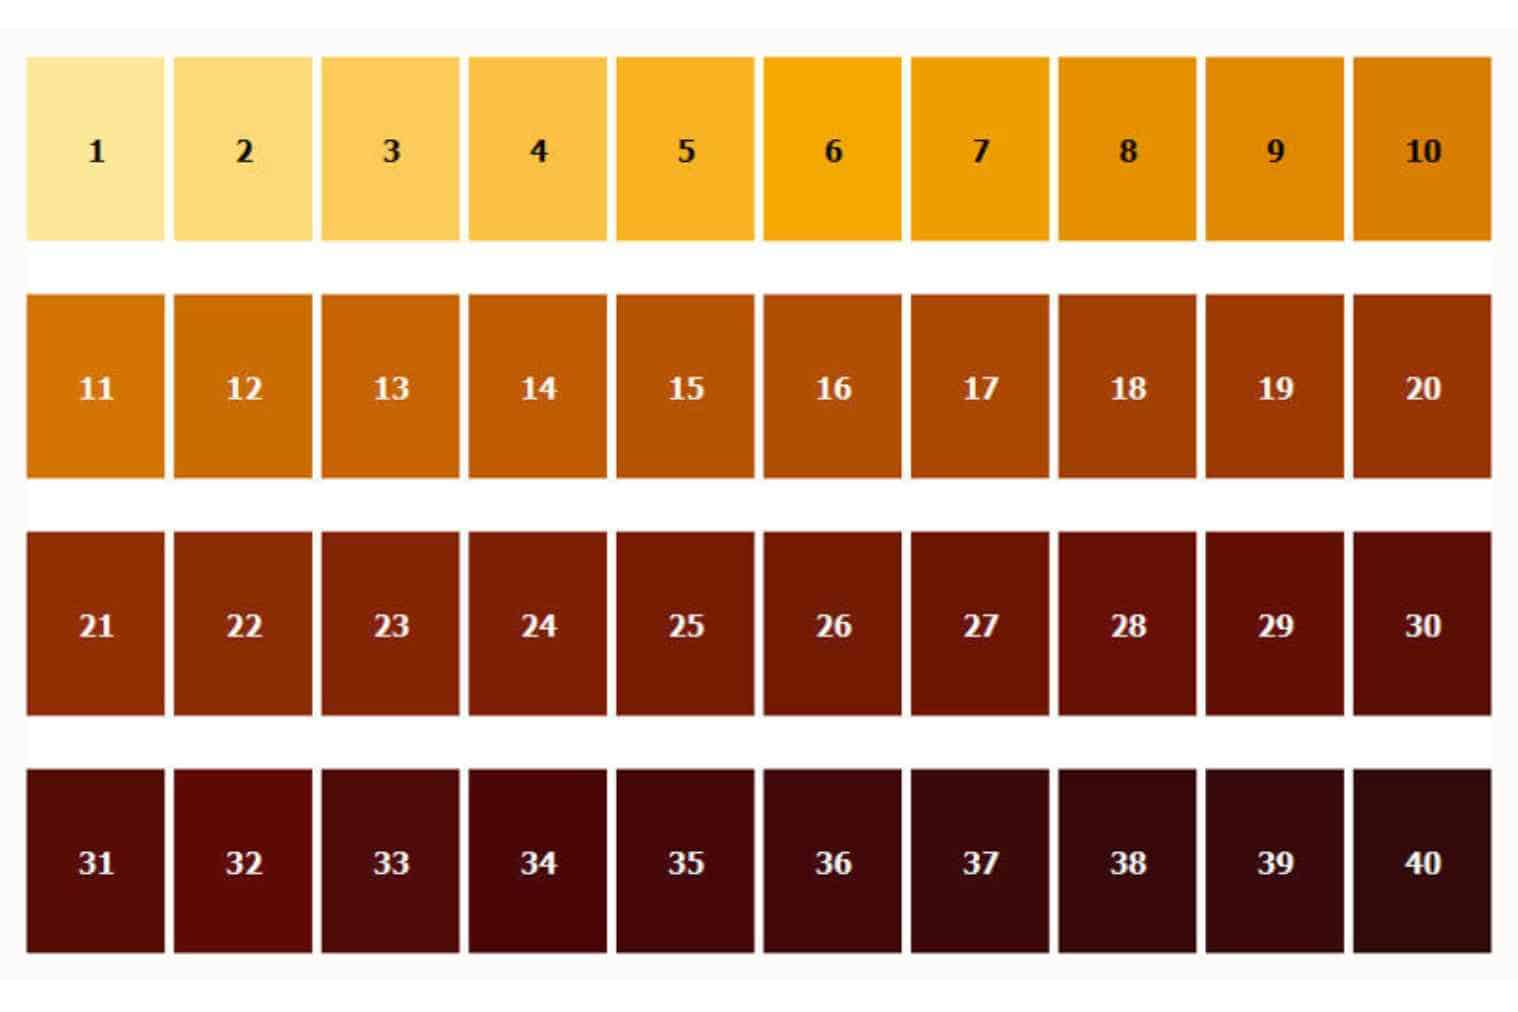 Measuring beer color with a 430nm colorimeter